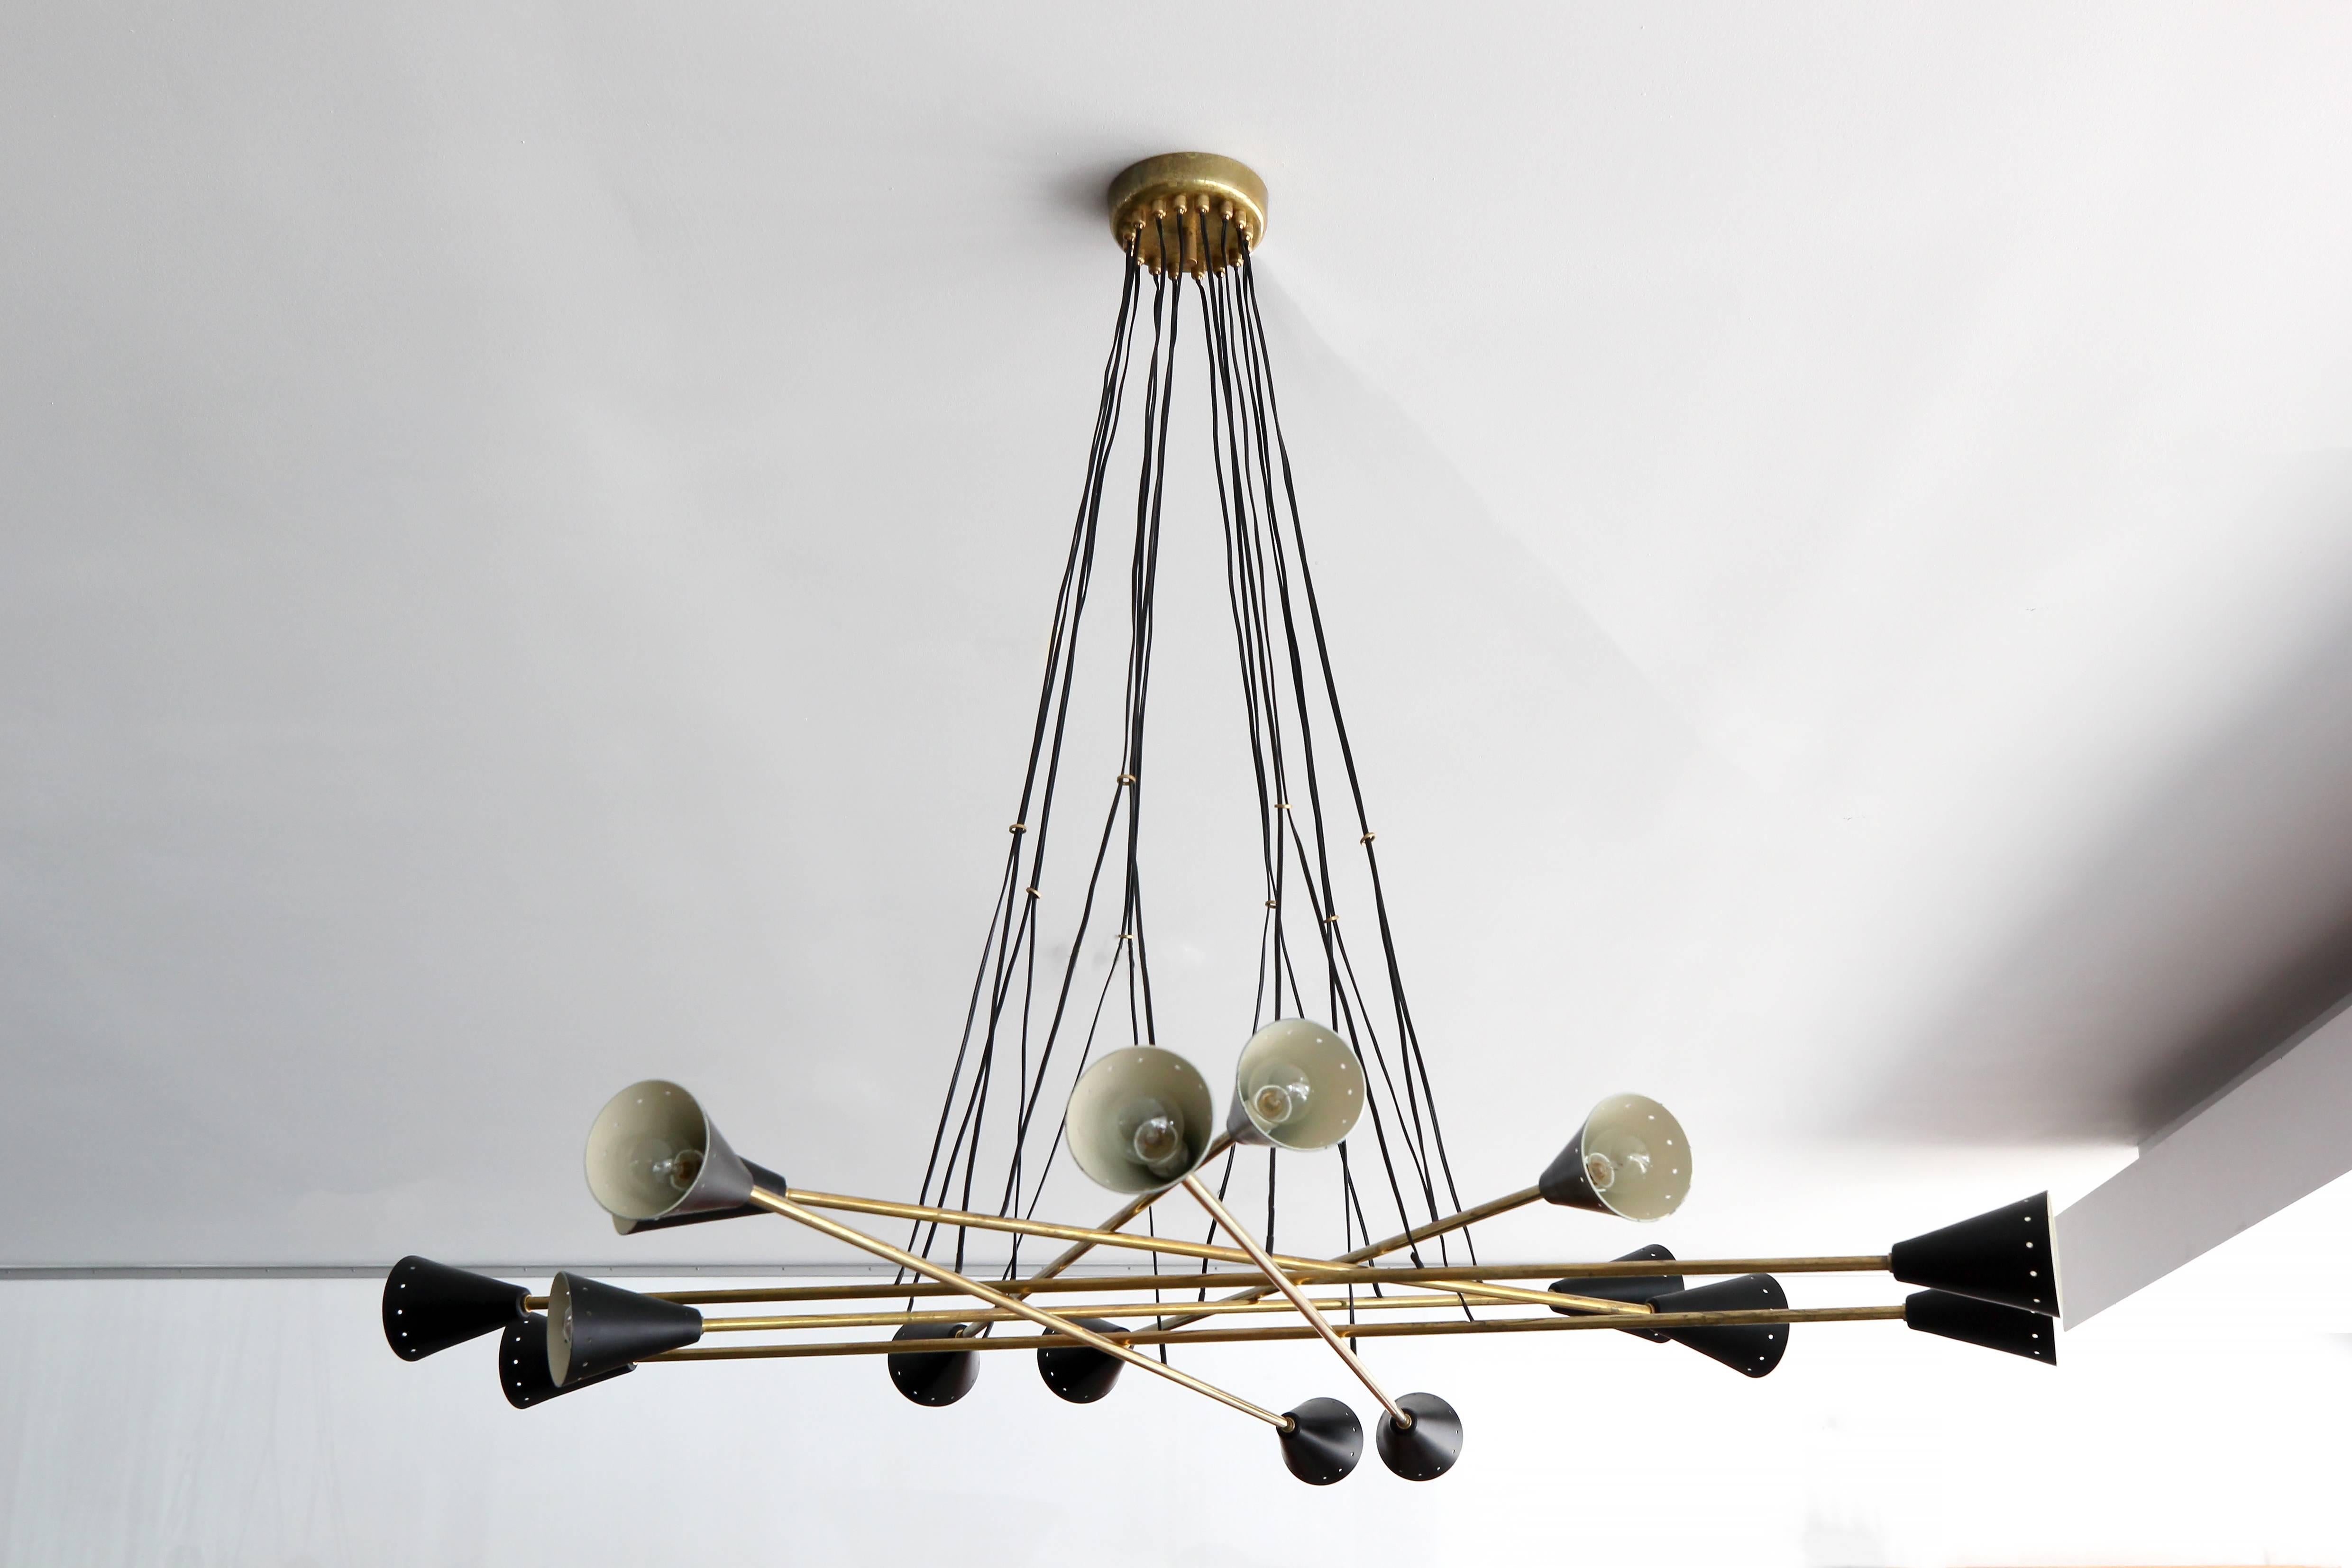 Incredible black and brass sixteen-light chandelier with woven wires for a stunning Silhouette.
Newly produced in Italy in the style of Stilnovo